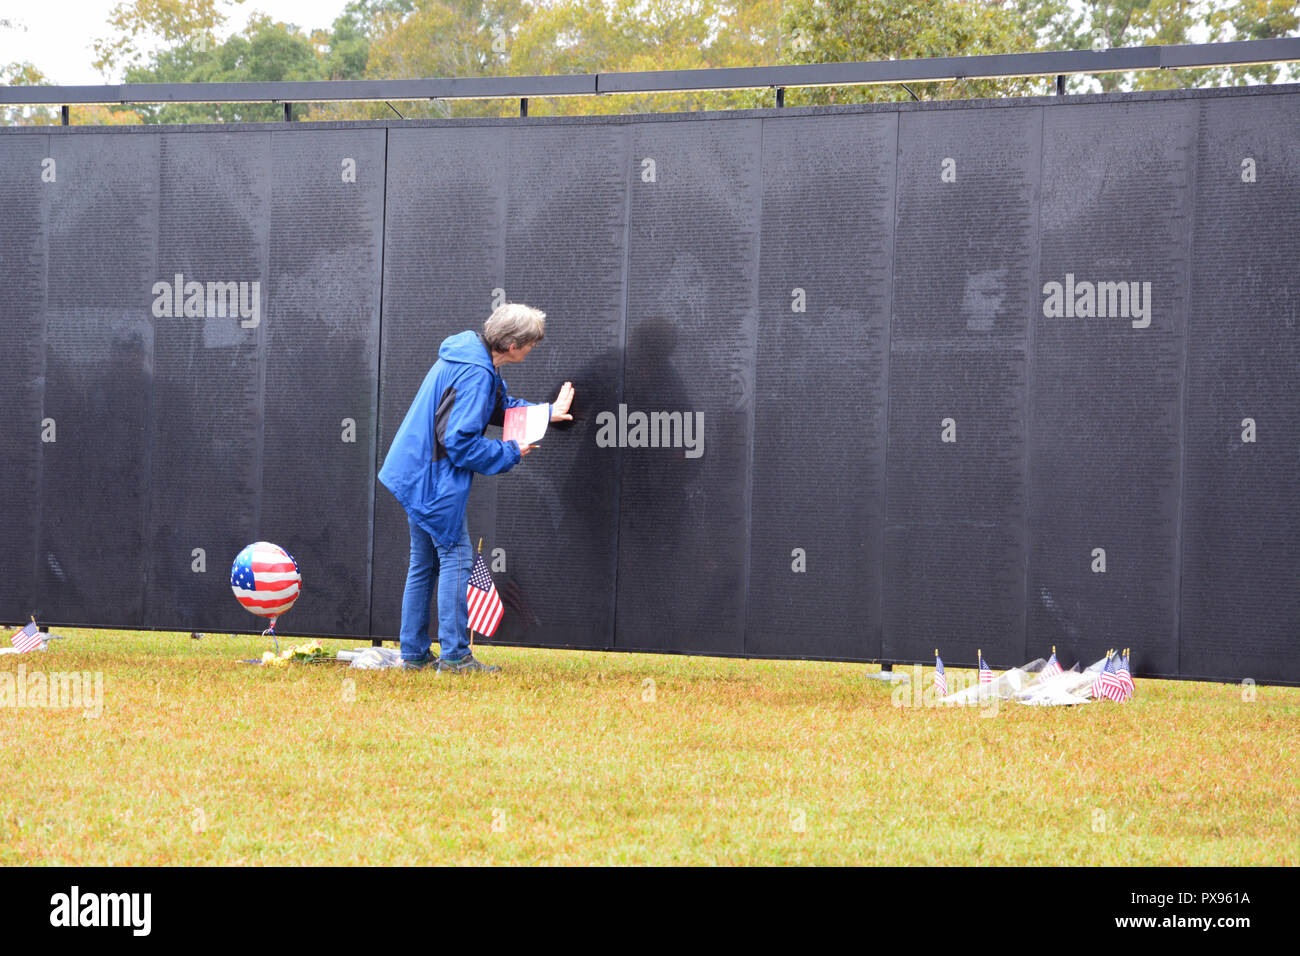 Wake Forest, North Carolina, United States. 20th Oct, 2018: The Wall That Heals, a mobile replica of the Vietnam Memorial in Washington DC, visits Wake Forest on it's cross country journey honoring veterans and to provide friends and families a way to remember servicemen who died in the conflict. Credit: D Guest Smith/Alamy Live News Stock Photo